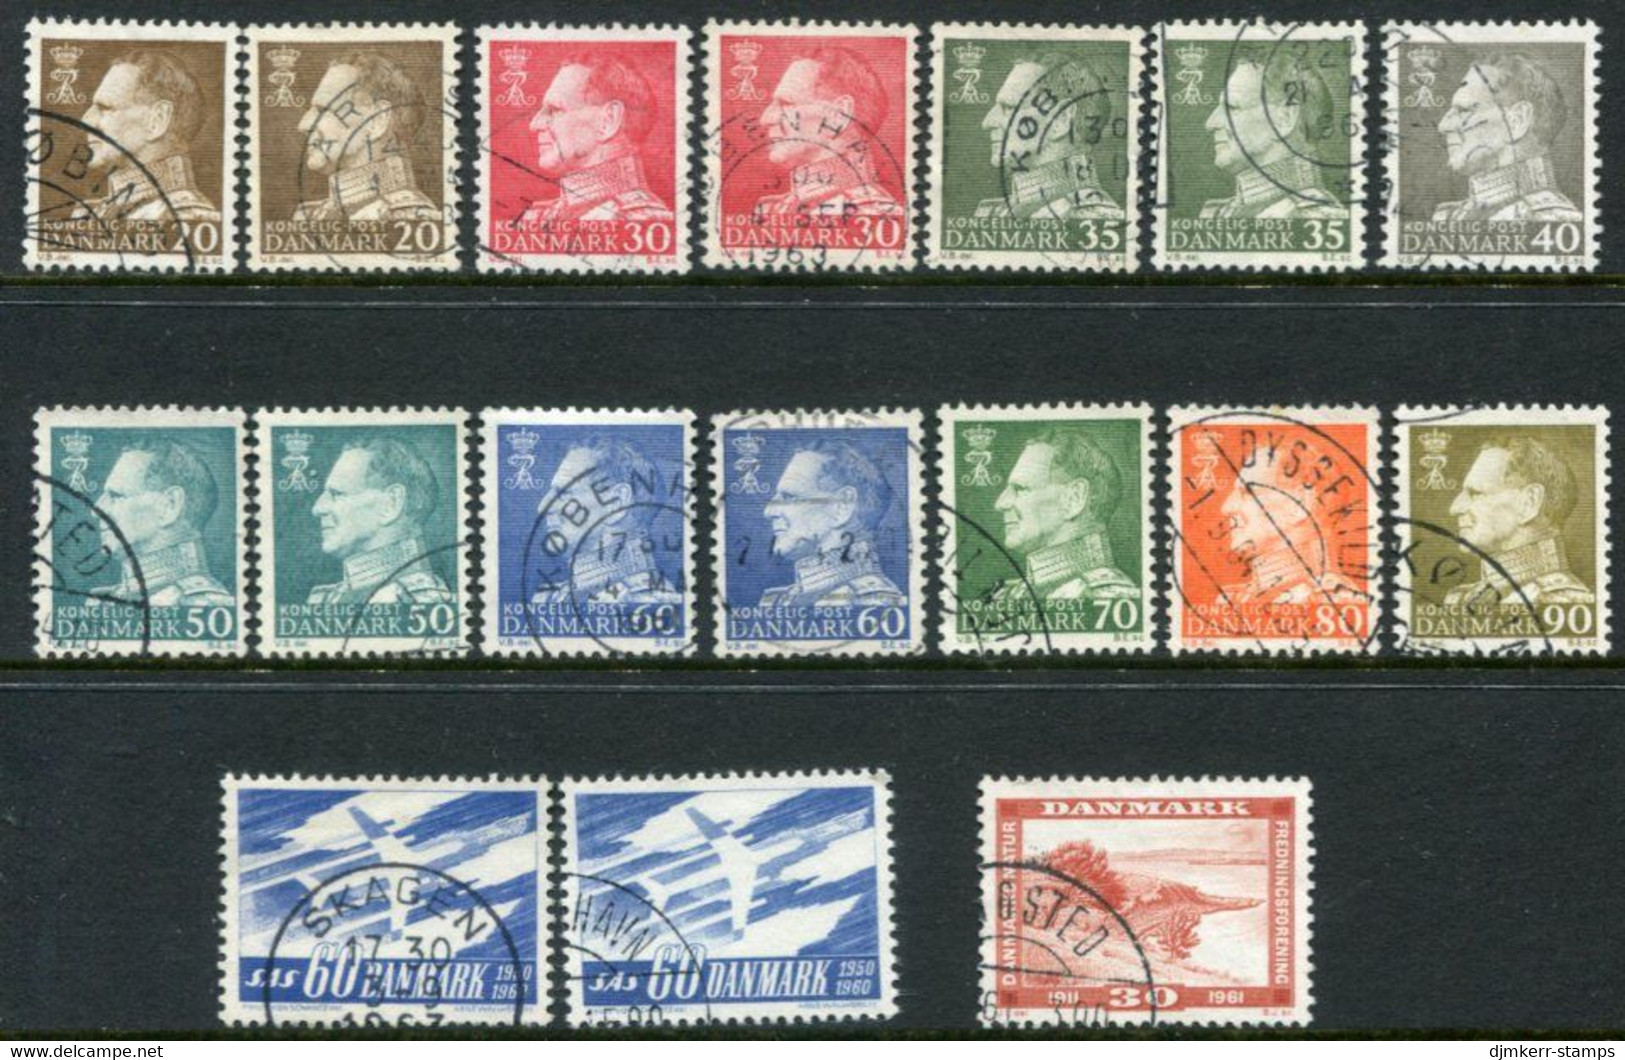 DENMARK 1961 Complete Issues With Ordinary And Fluorescent Papers, Used Michel 388-98 - Gebraucht